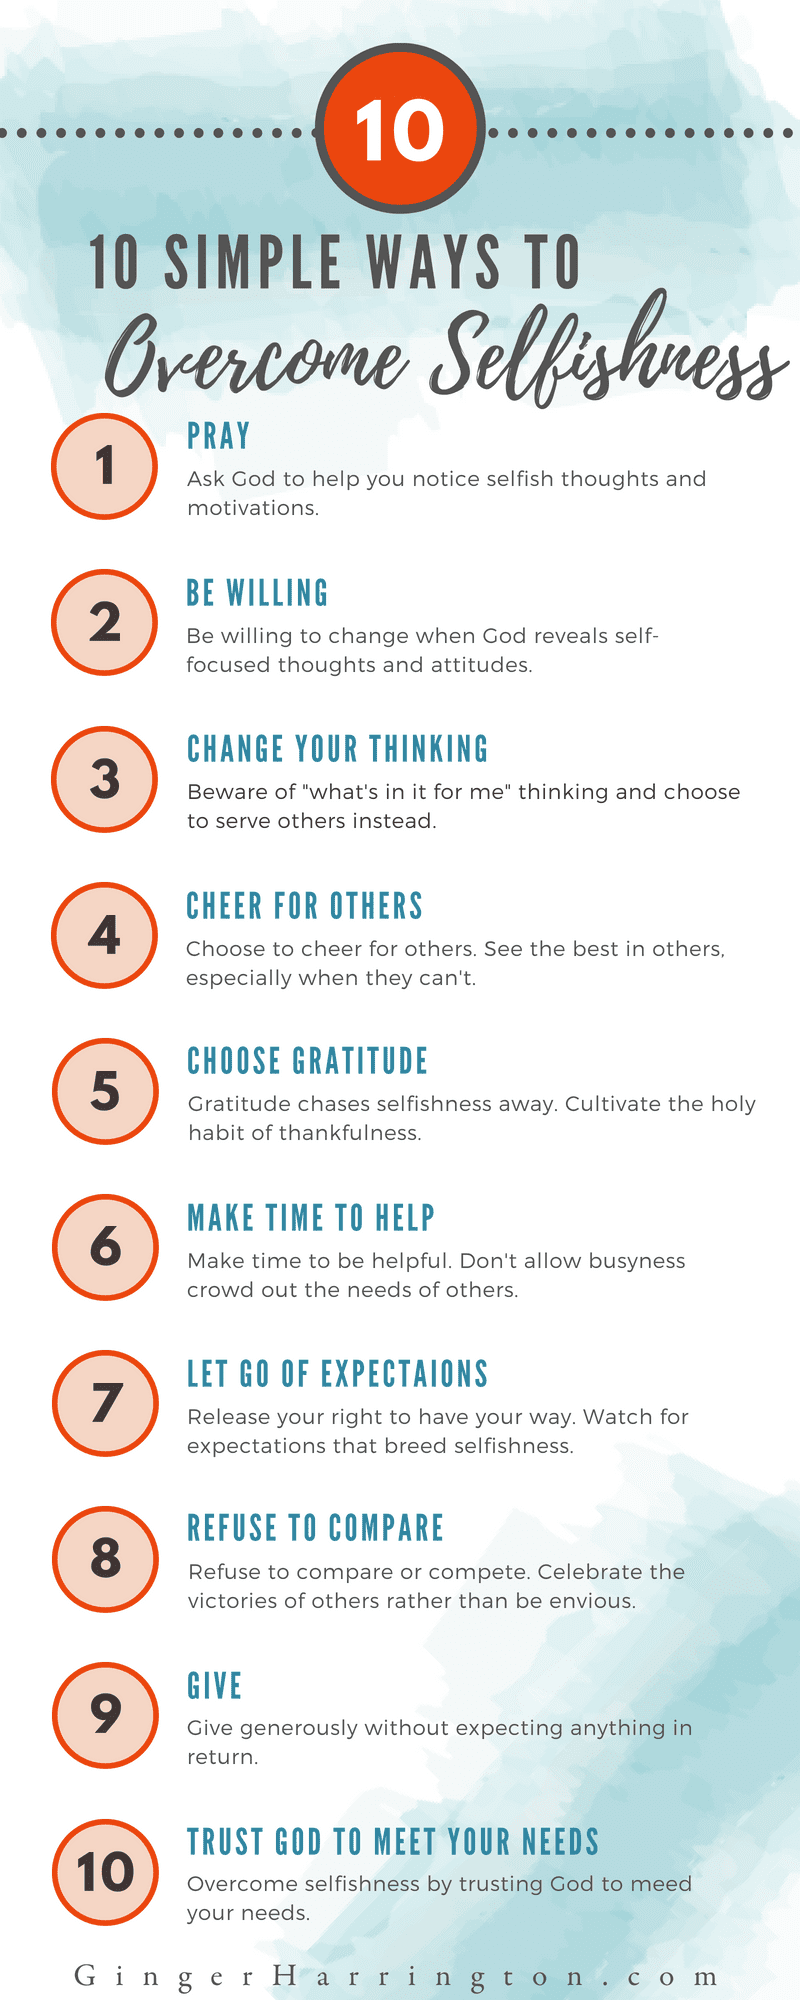 10 Simple Ways to Overcome Selfishness Infographic from GingerHarrington, author of Holy in the Moment.